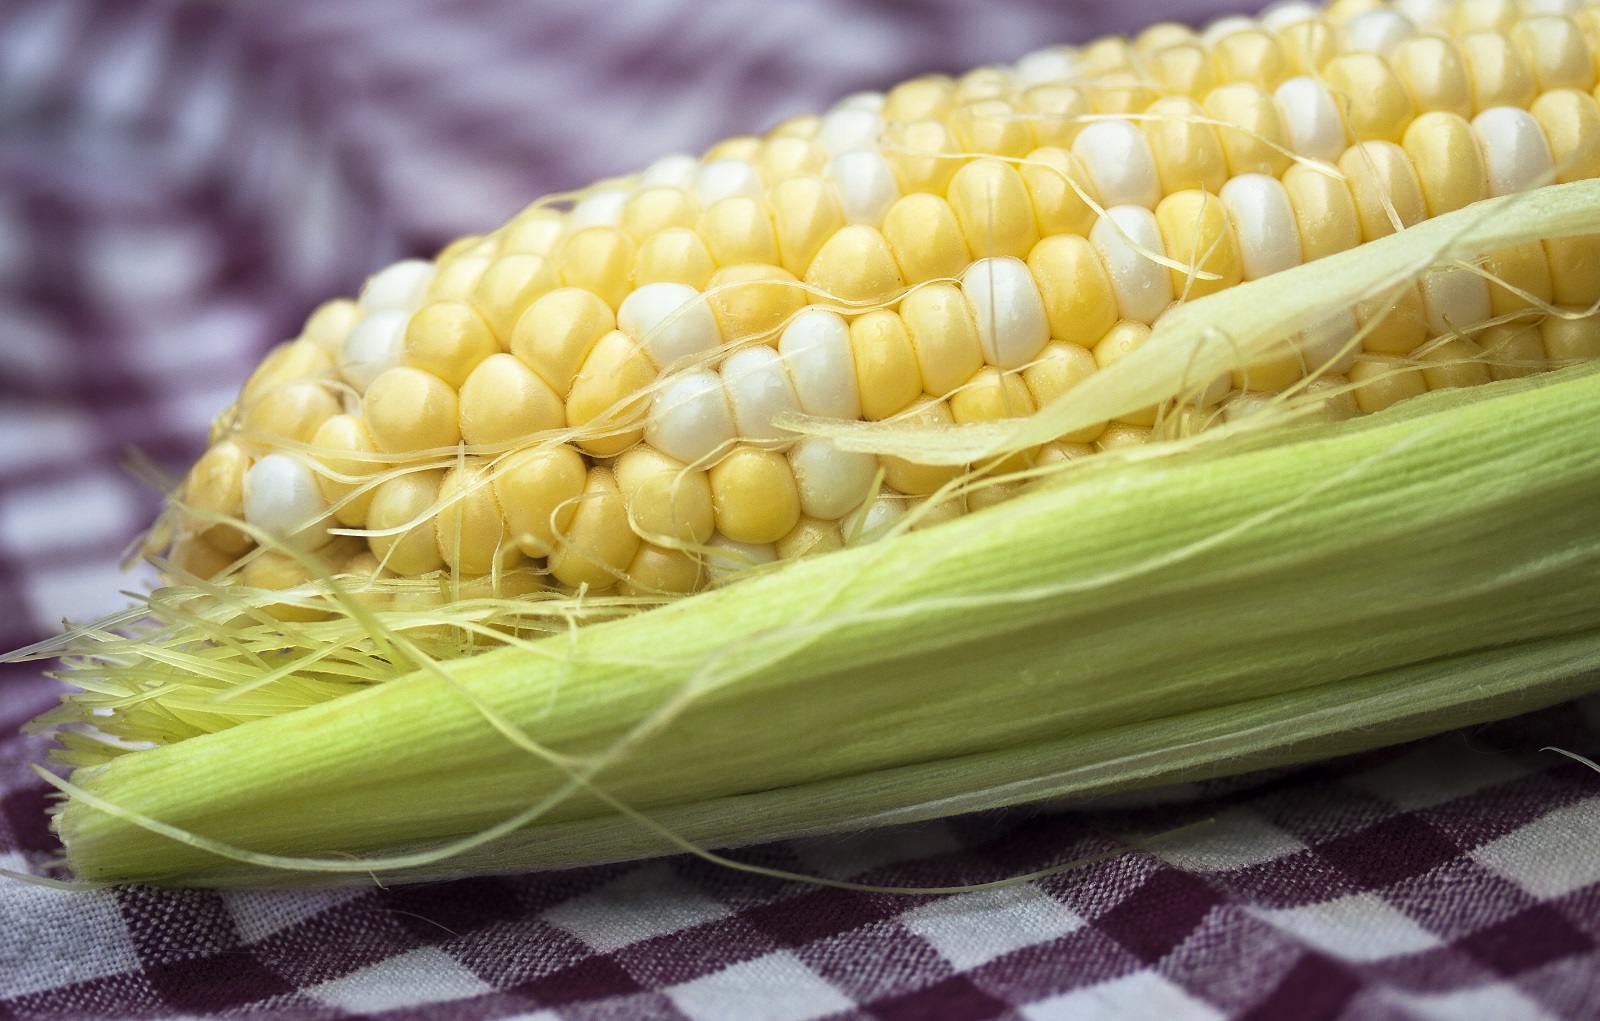 Corn, Corn, Go Away: The Price We Really Pay for Corn